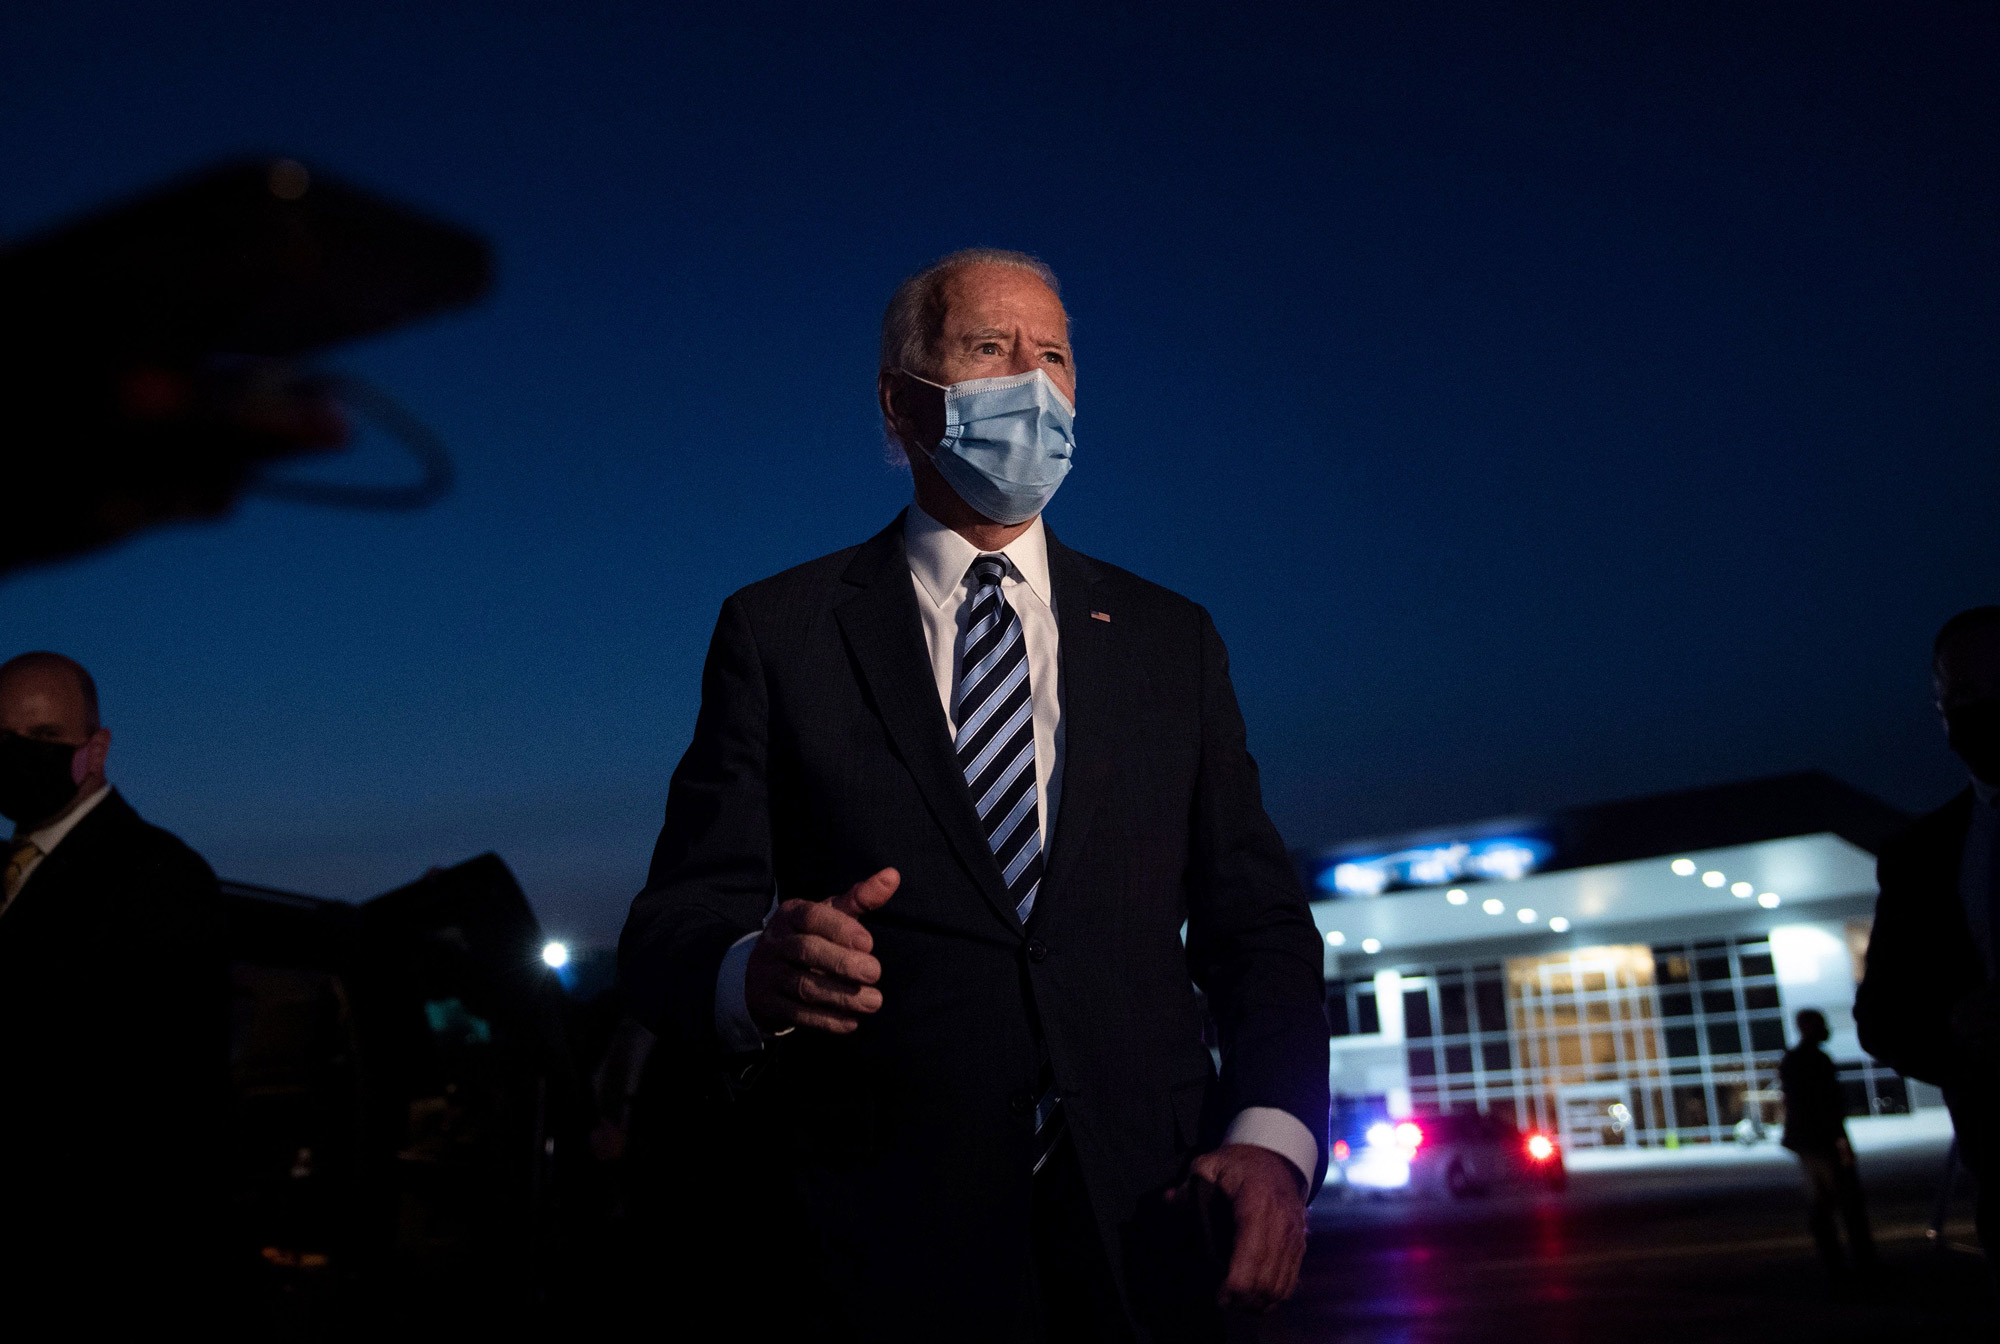 Democratic presidential candidate Joe Biden speaks to the media before boarding his plane at Hagerstown Regional Airport on October 6 in Hagerstown, Maryland. 